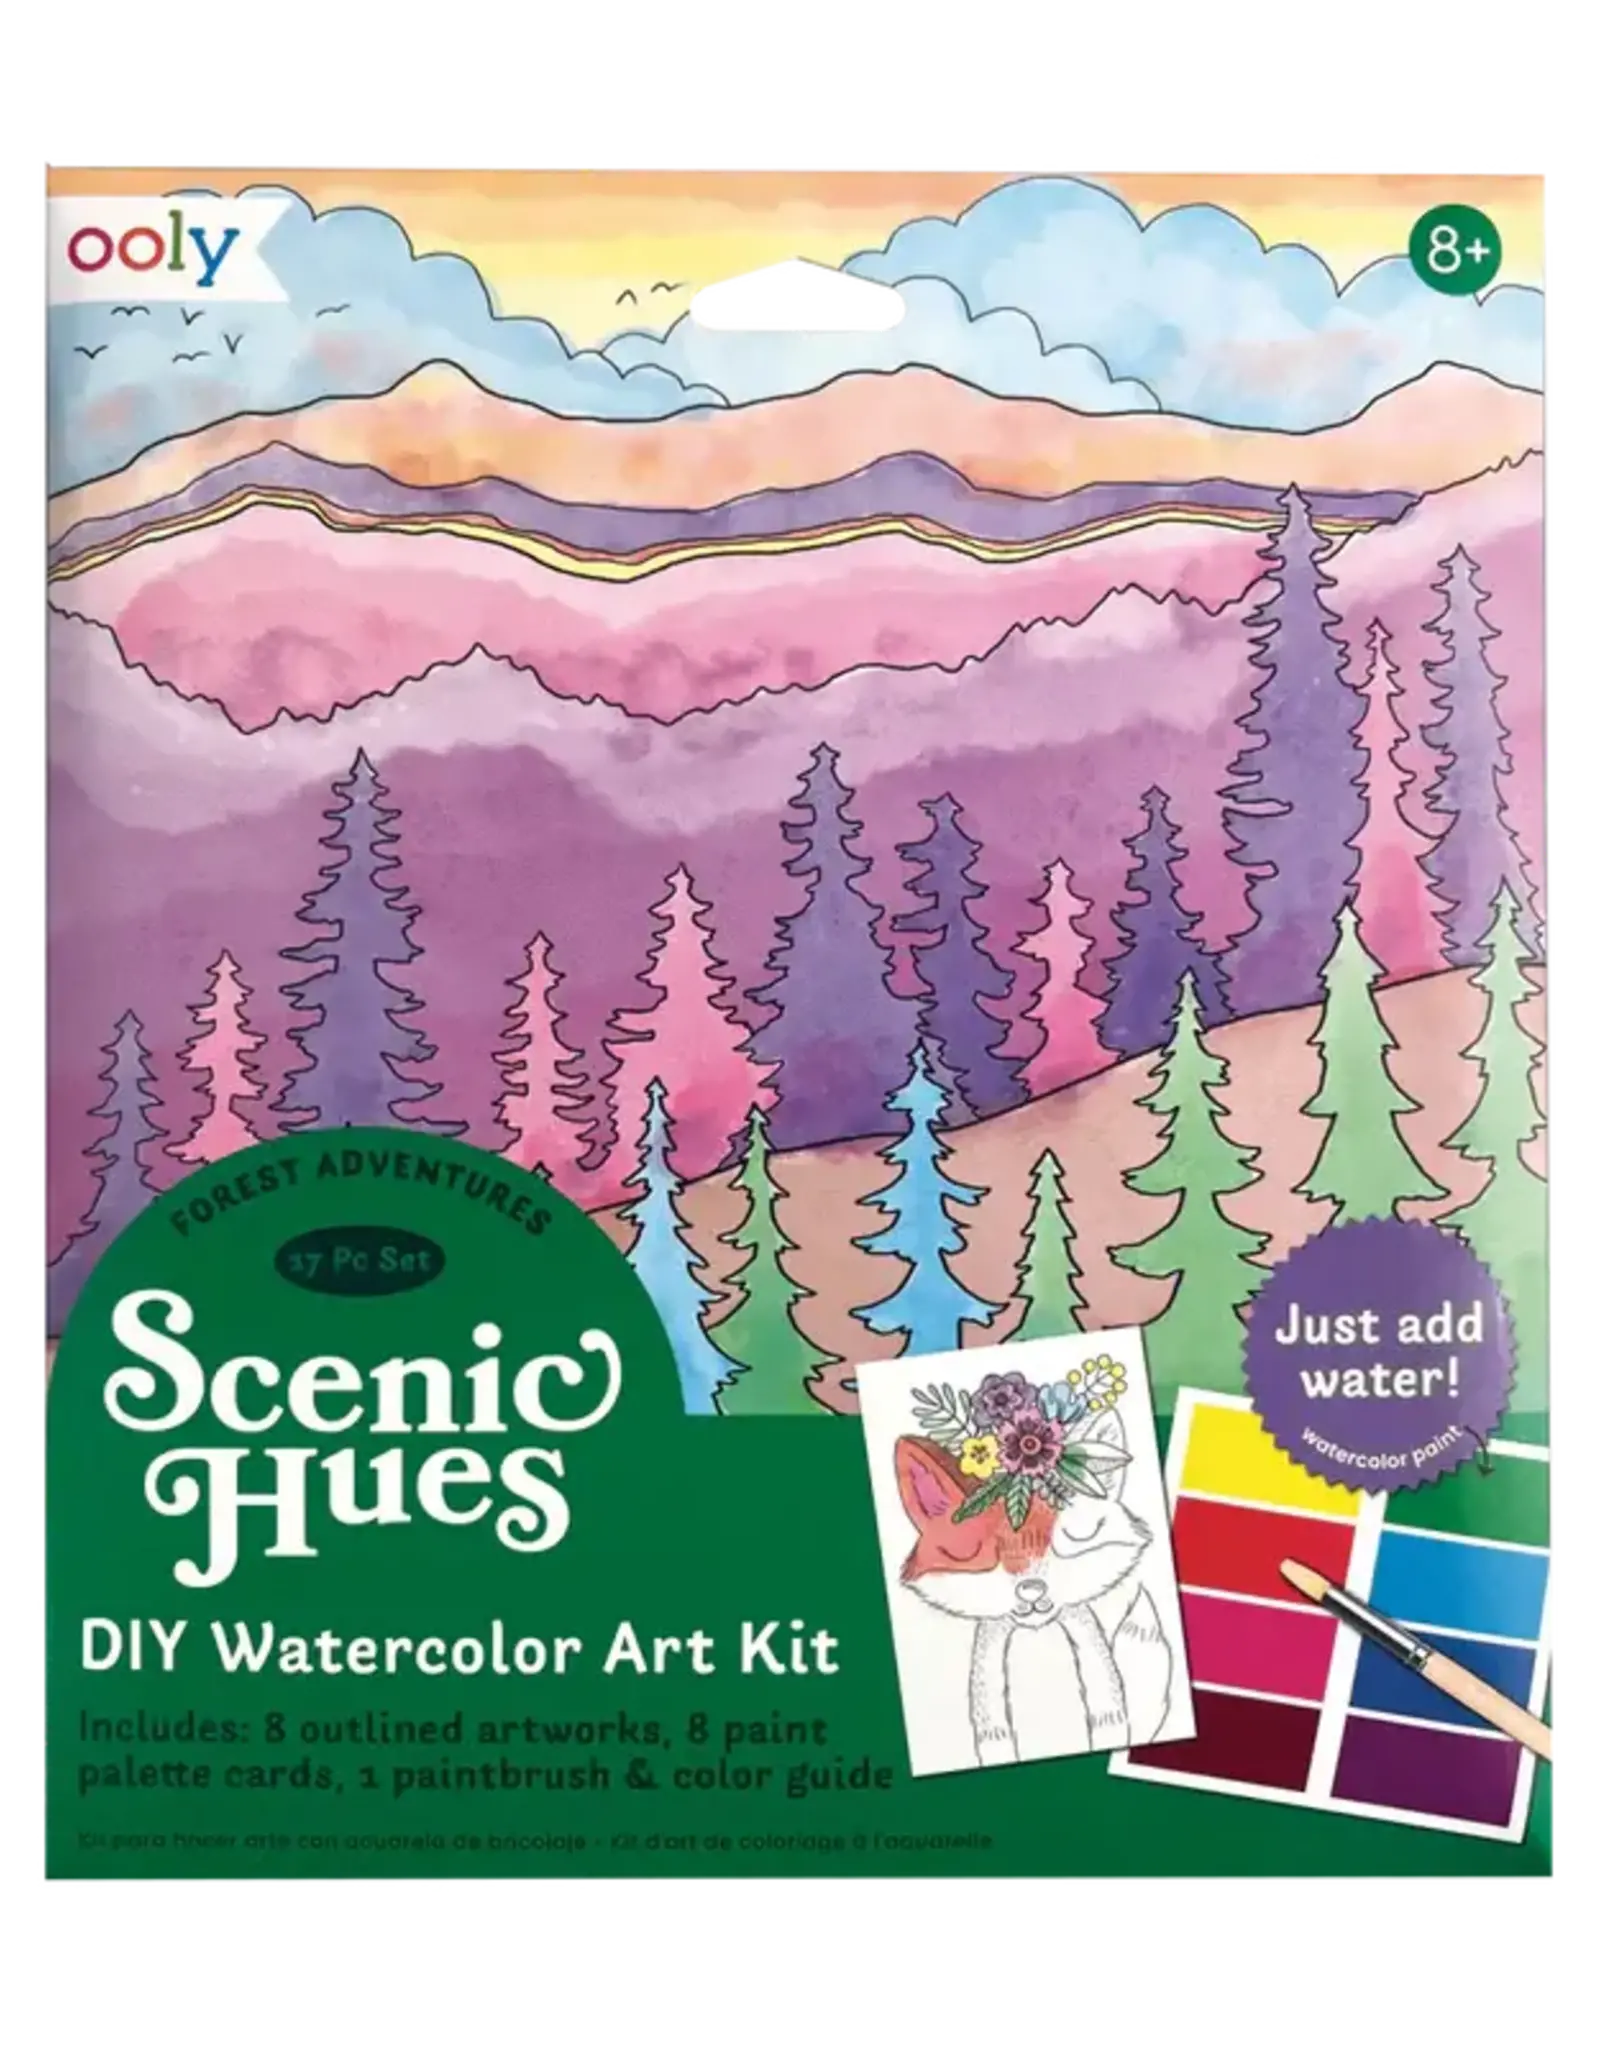 Ooly Ooly - Scenic Hues DIY Watercolor Art Kit, Forest Adventure